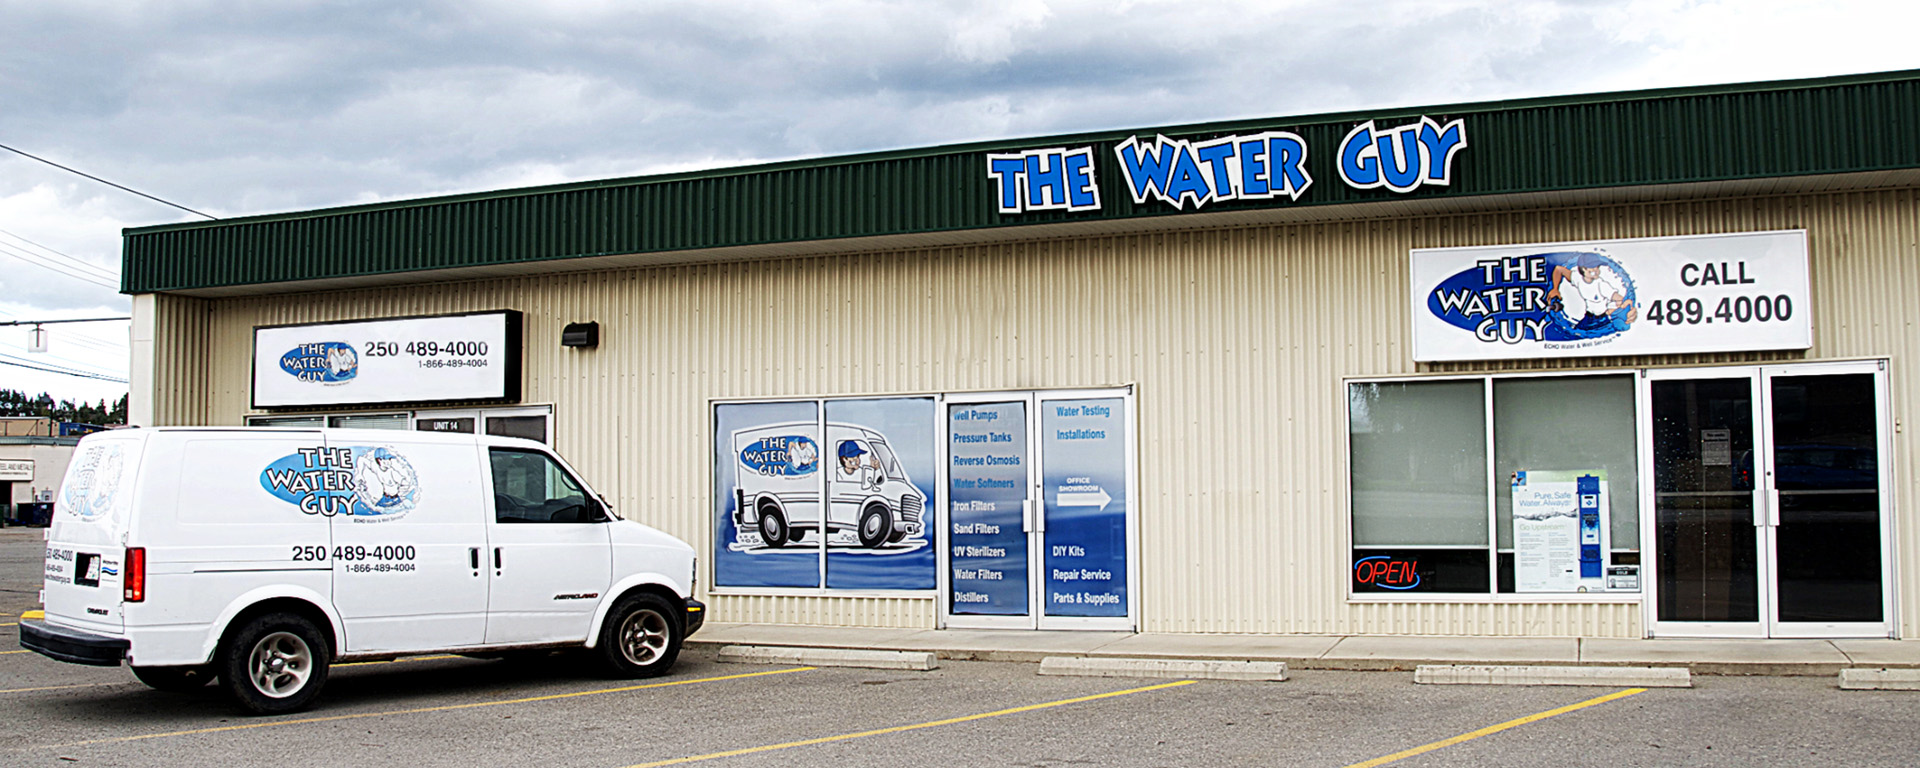 Exterior of The Water Guy building in Cranbrook, BC. 